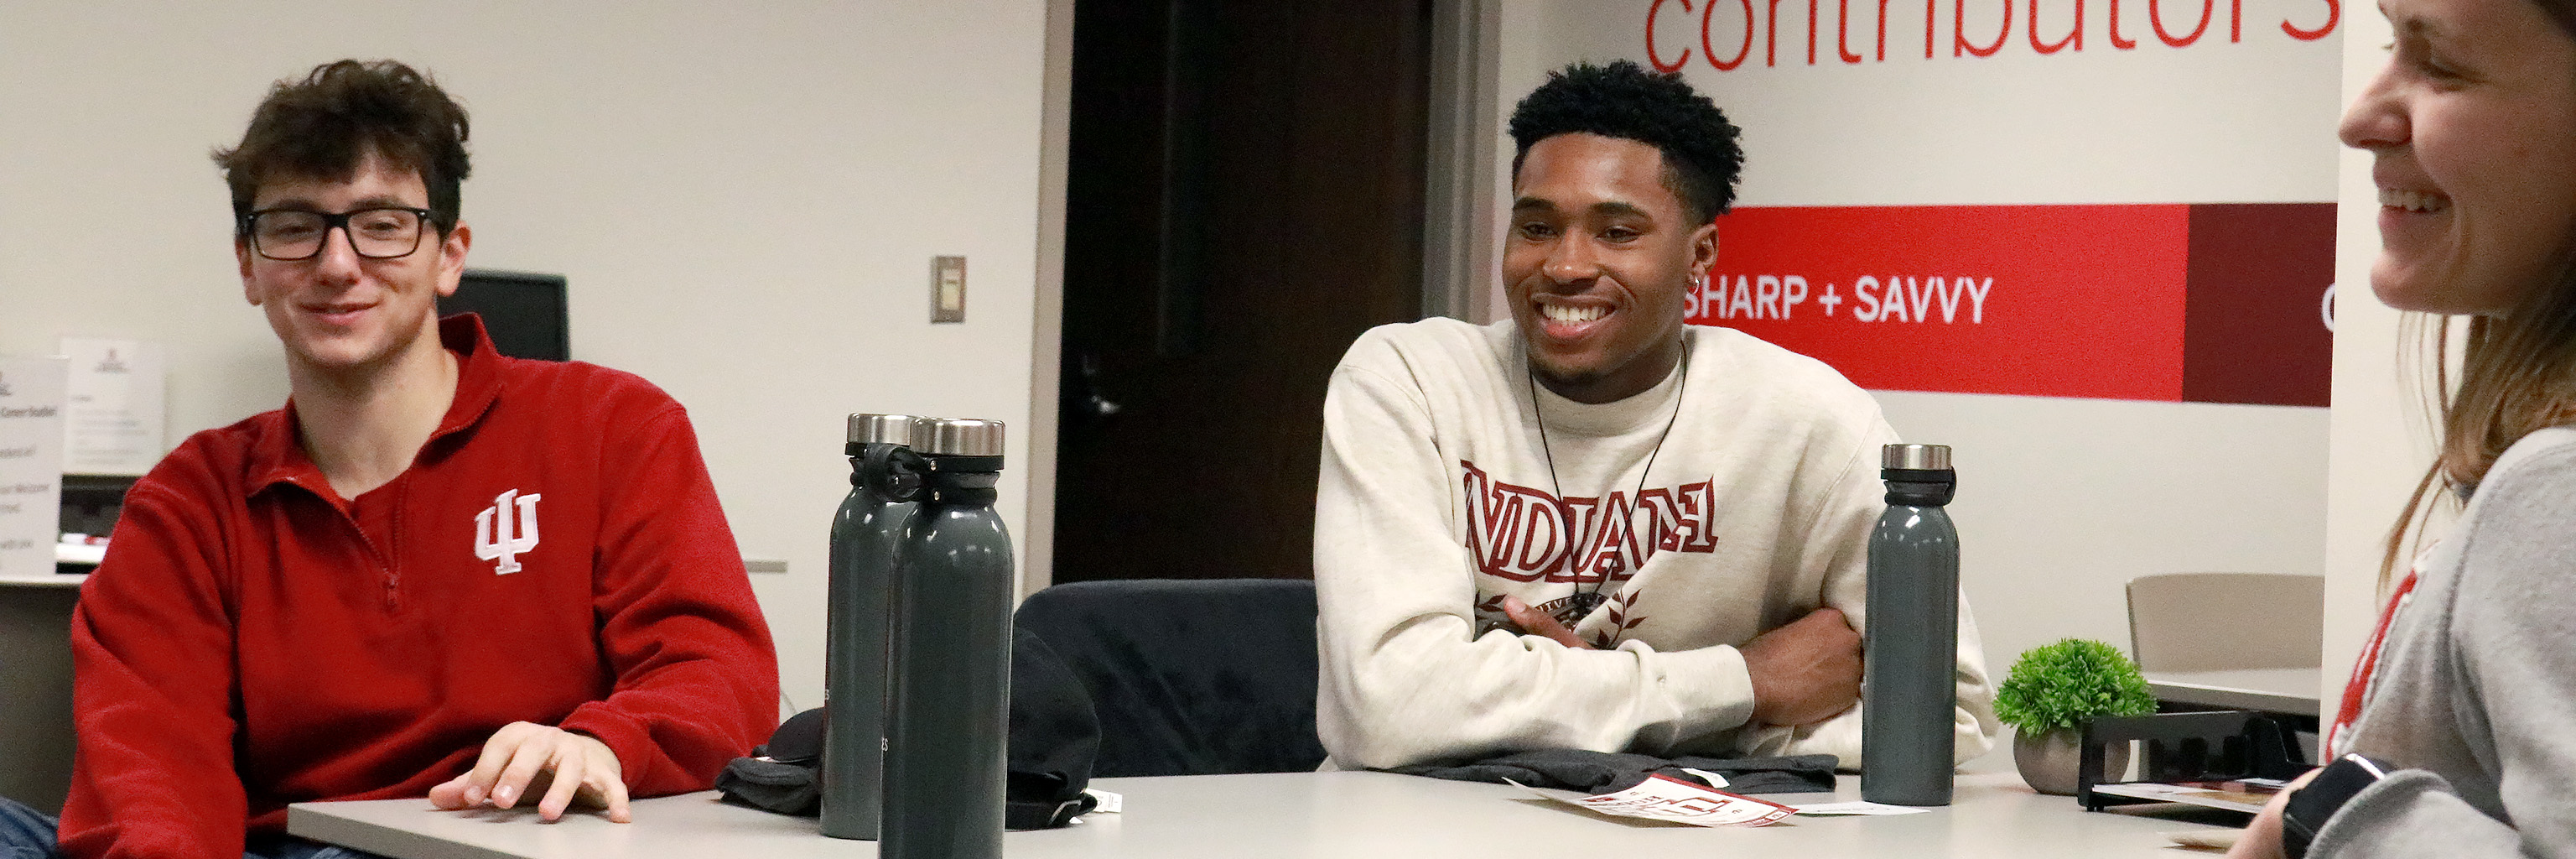 Three students wearing IU attire sit at a desk, smiling